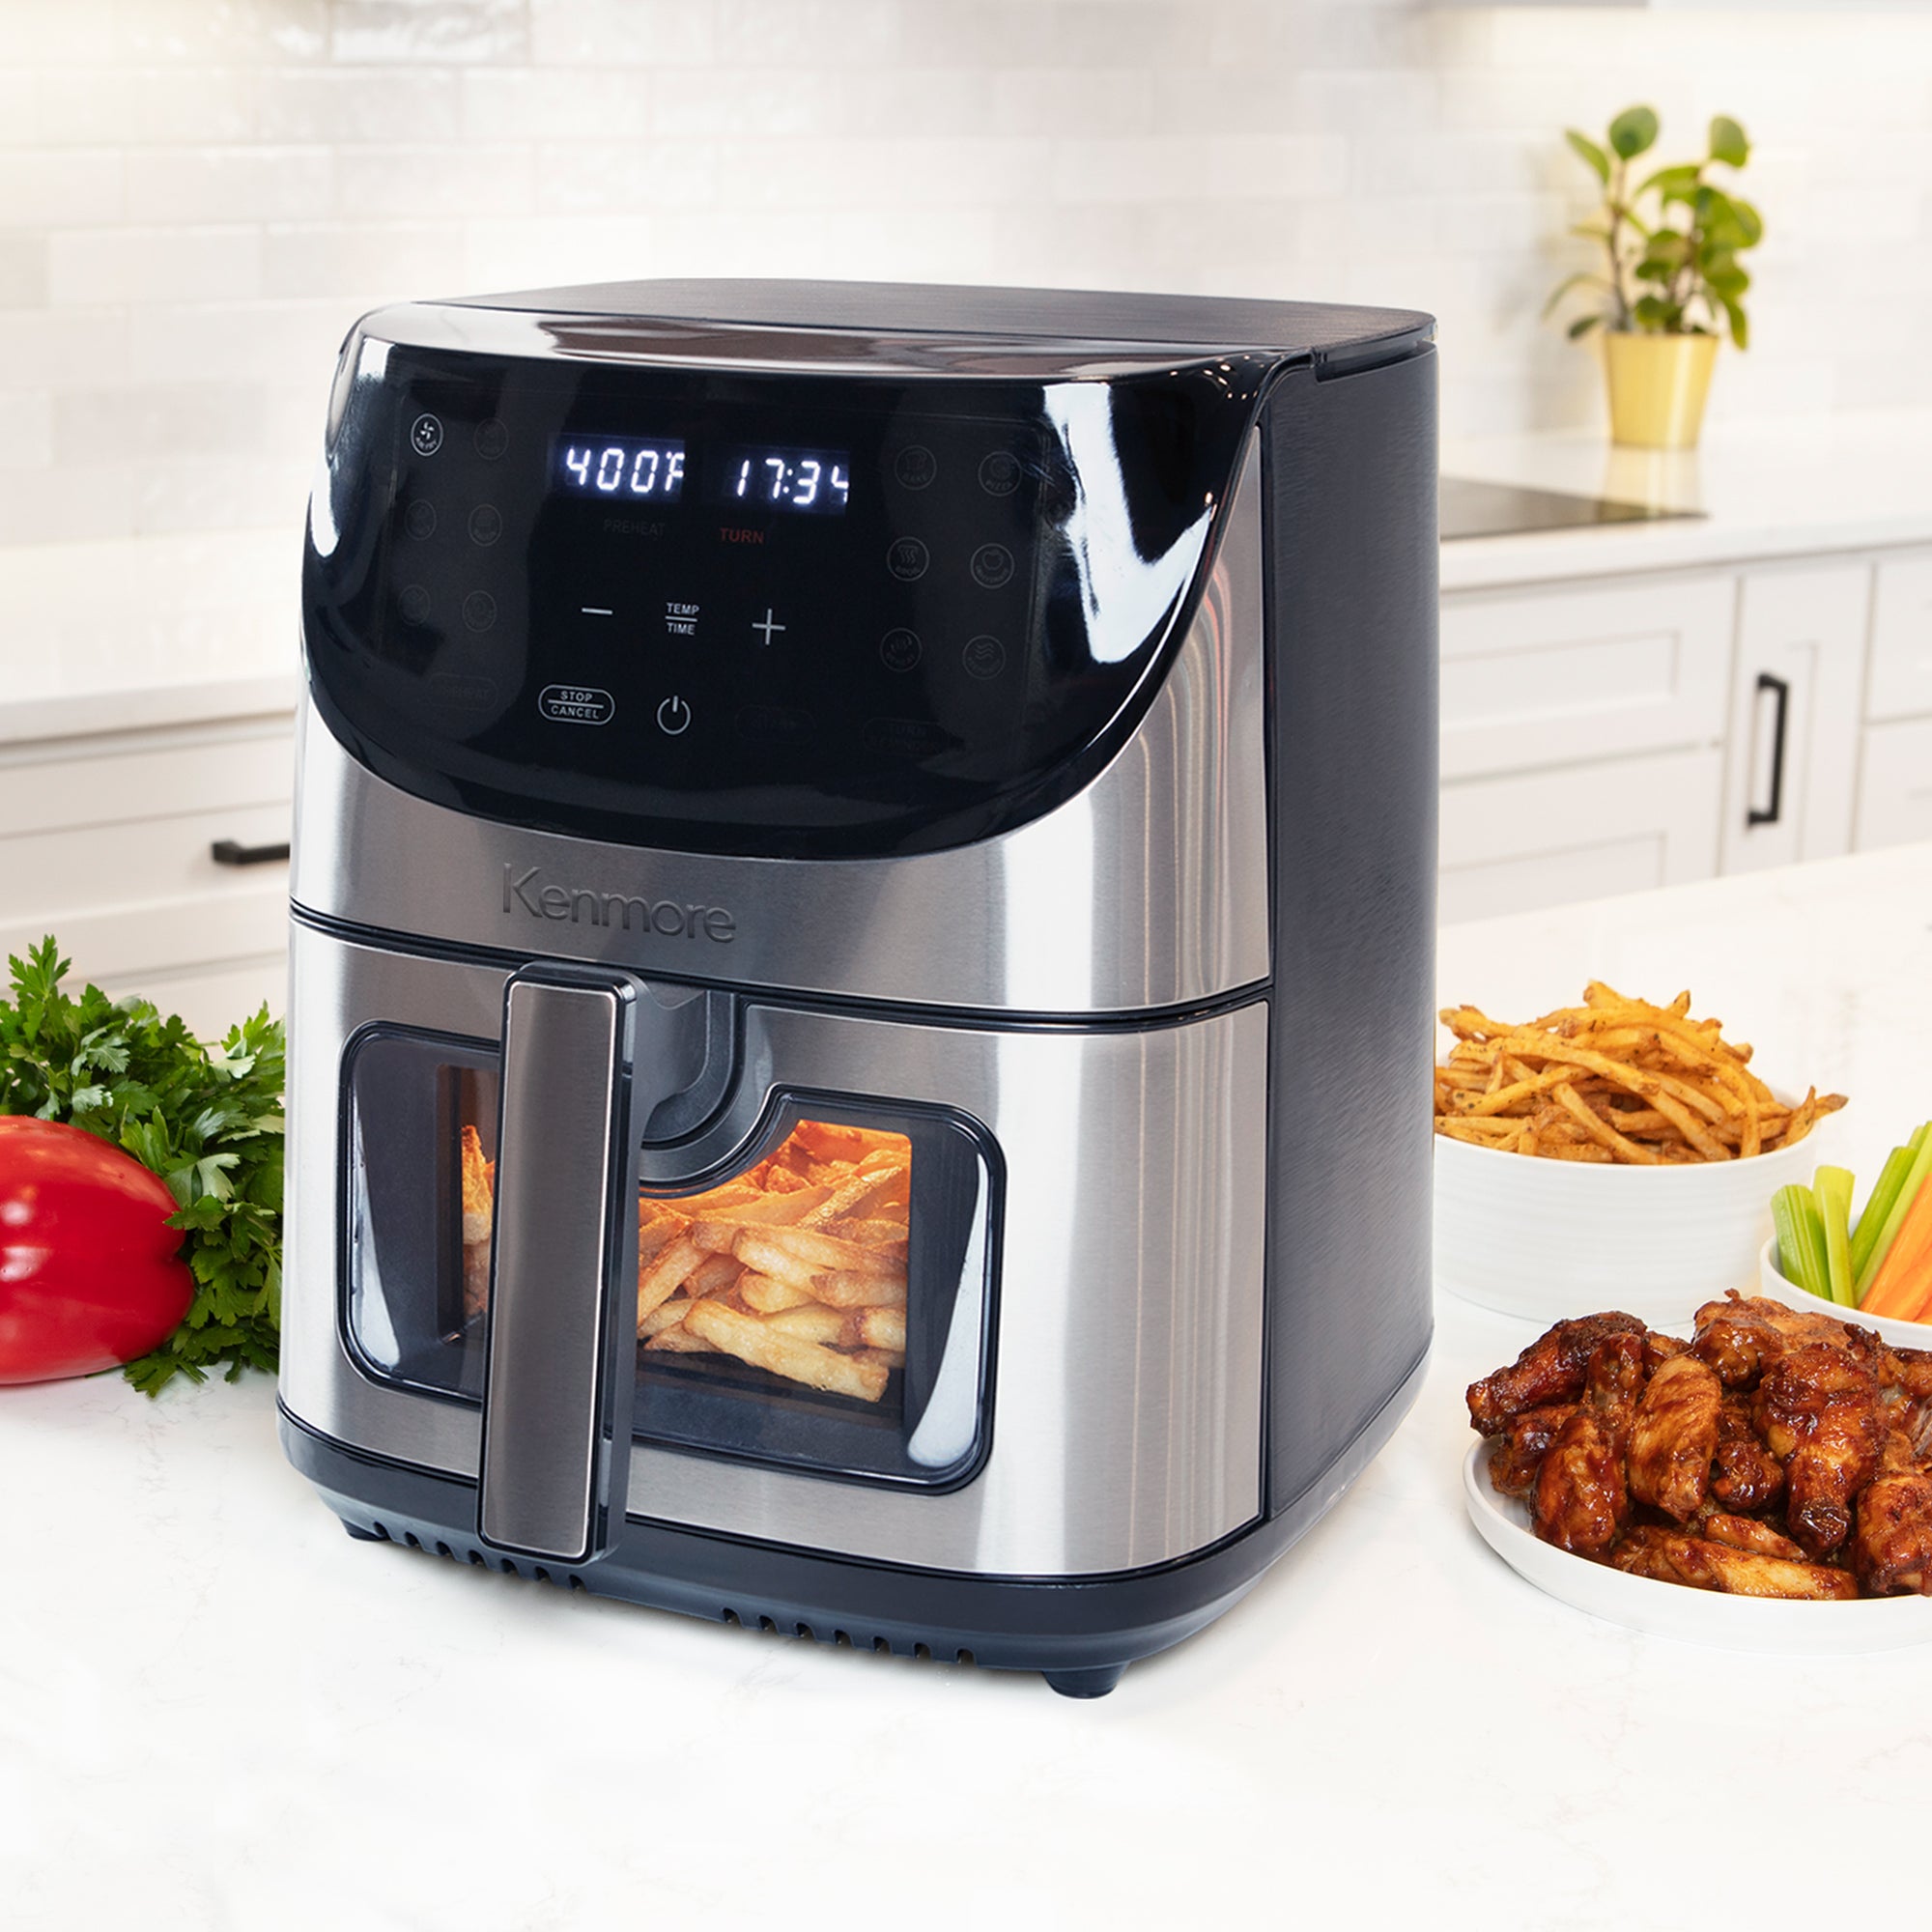 Kenmore digital air fryer on a white kitchen counter with plates of cooked food arranged around it and white cupboards and white tile backsplash in the background.